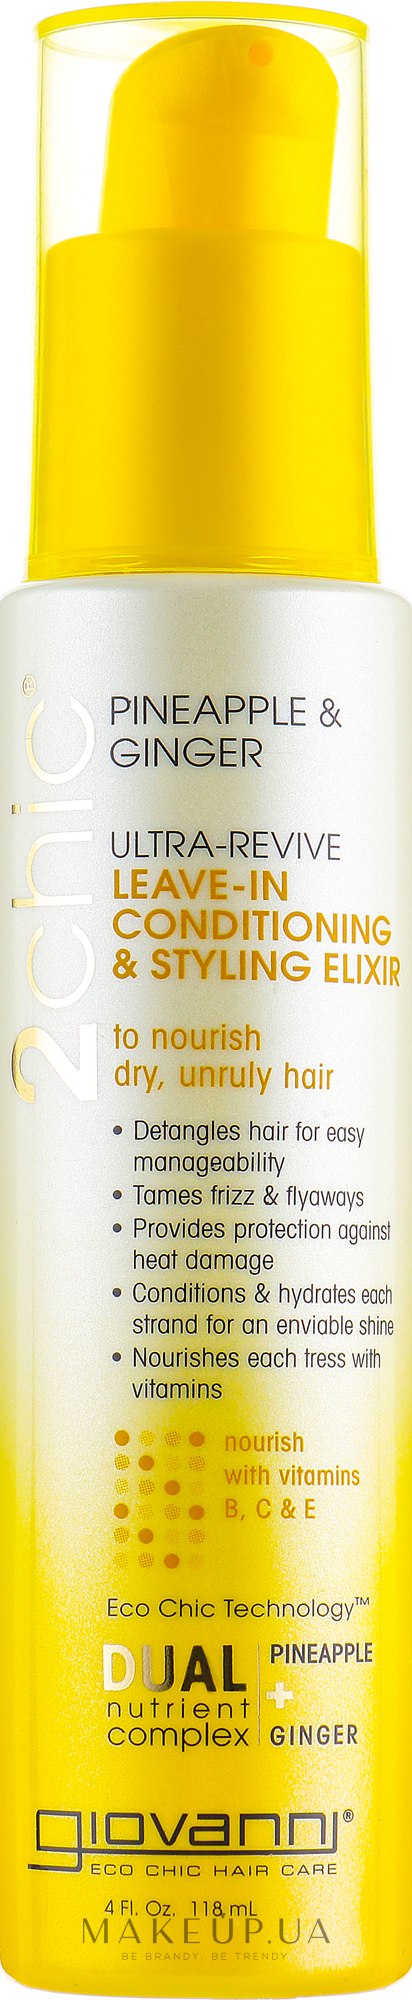 Кондицонер-стайлер для волосся  - Giovanni 2Chic Ultra-Revive Leave-in Conditioning & Styling Elixir Dry or Unruly Hair — фото 118ml